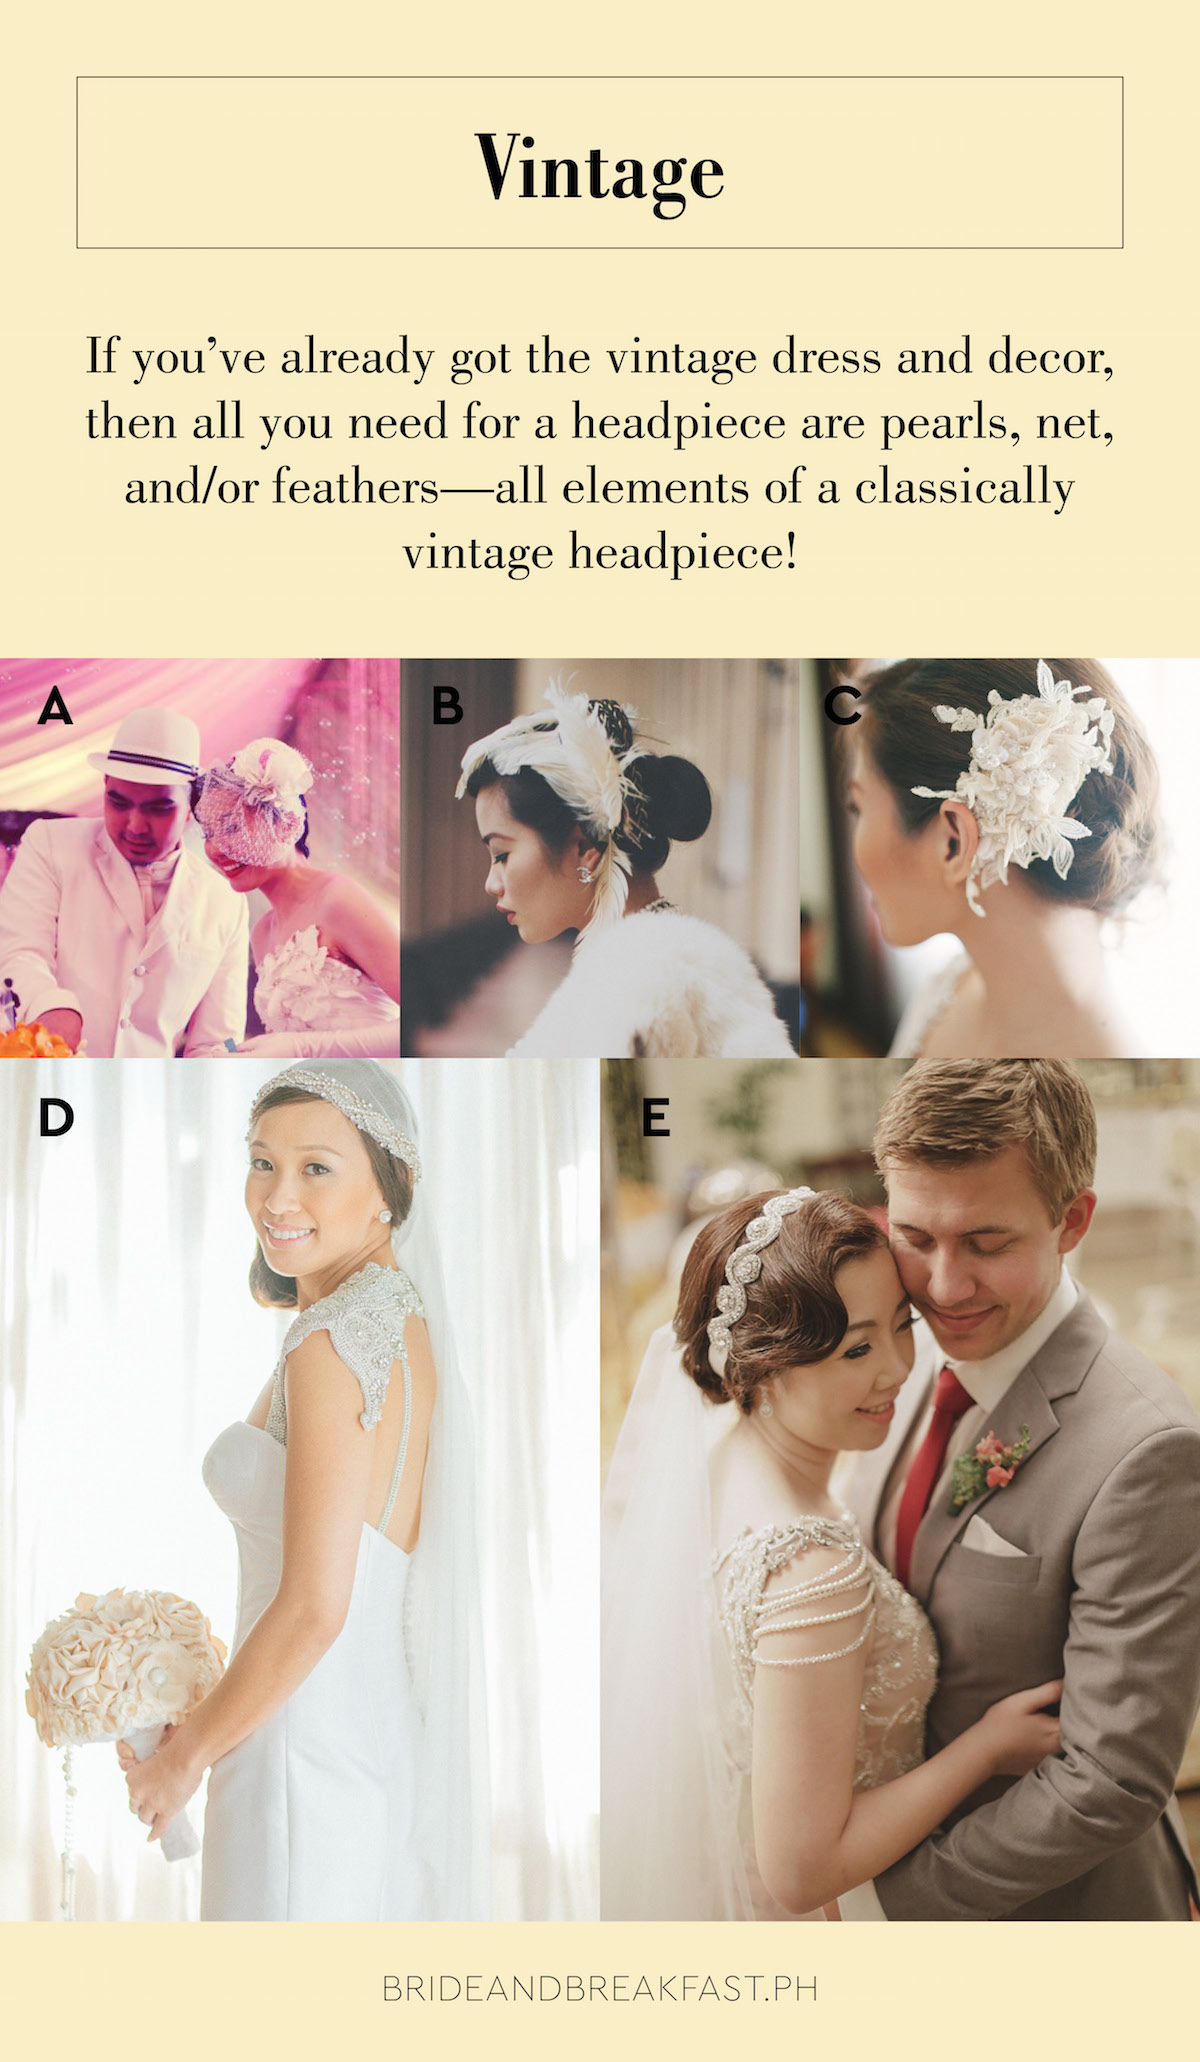 Vintage If you've already got the vintage dress and decor, then all you need for a headpiece are pearls, net, and/or feathers--all elements of a classically vintage headpiece!